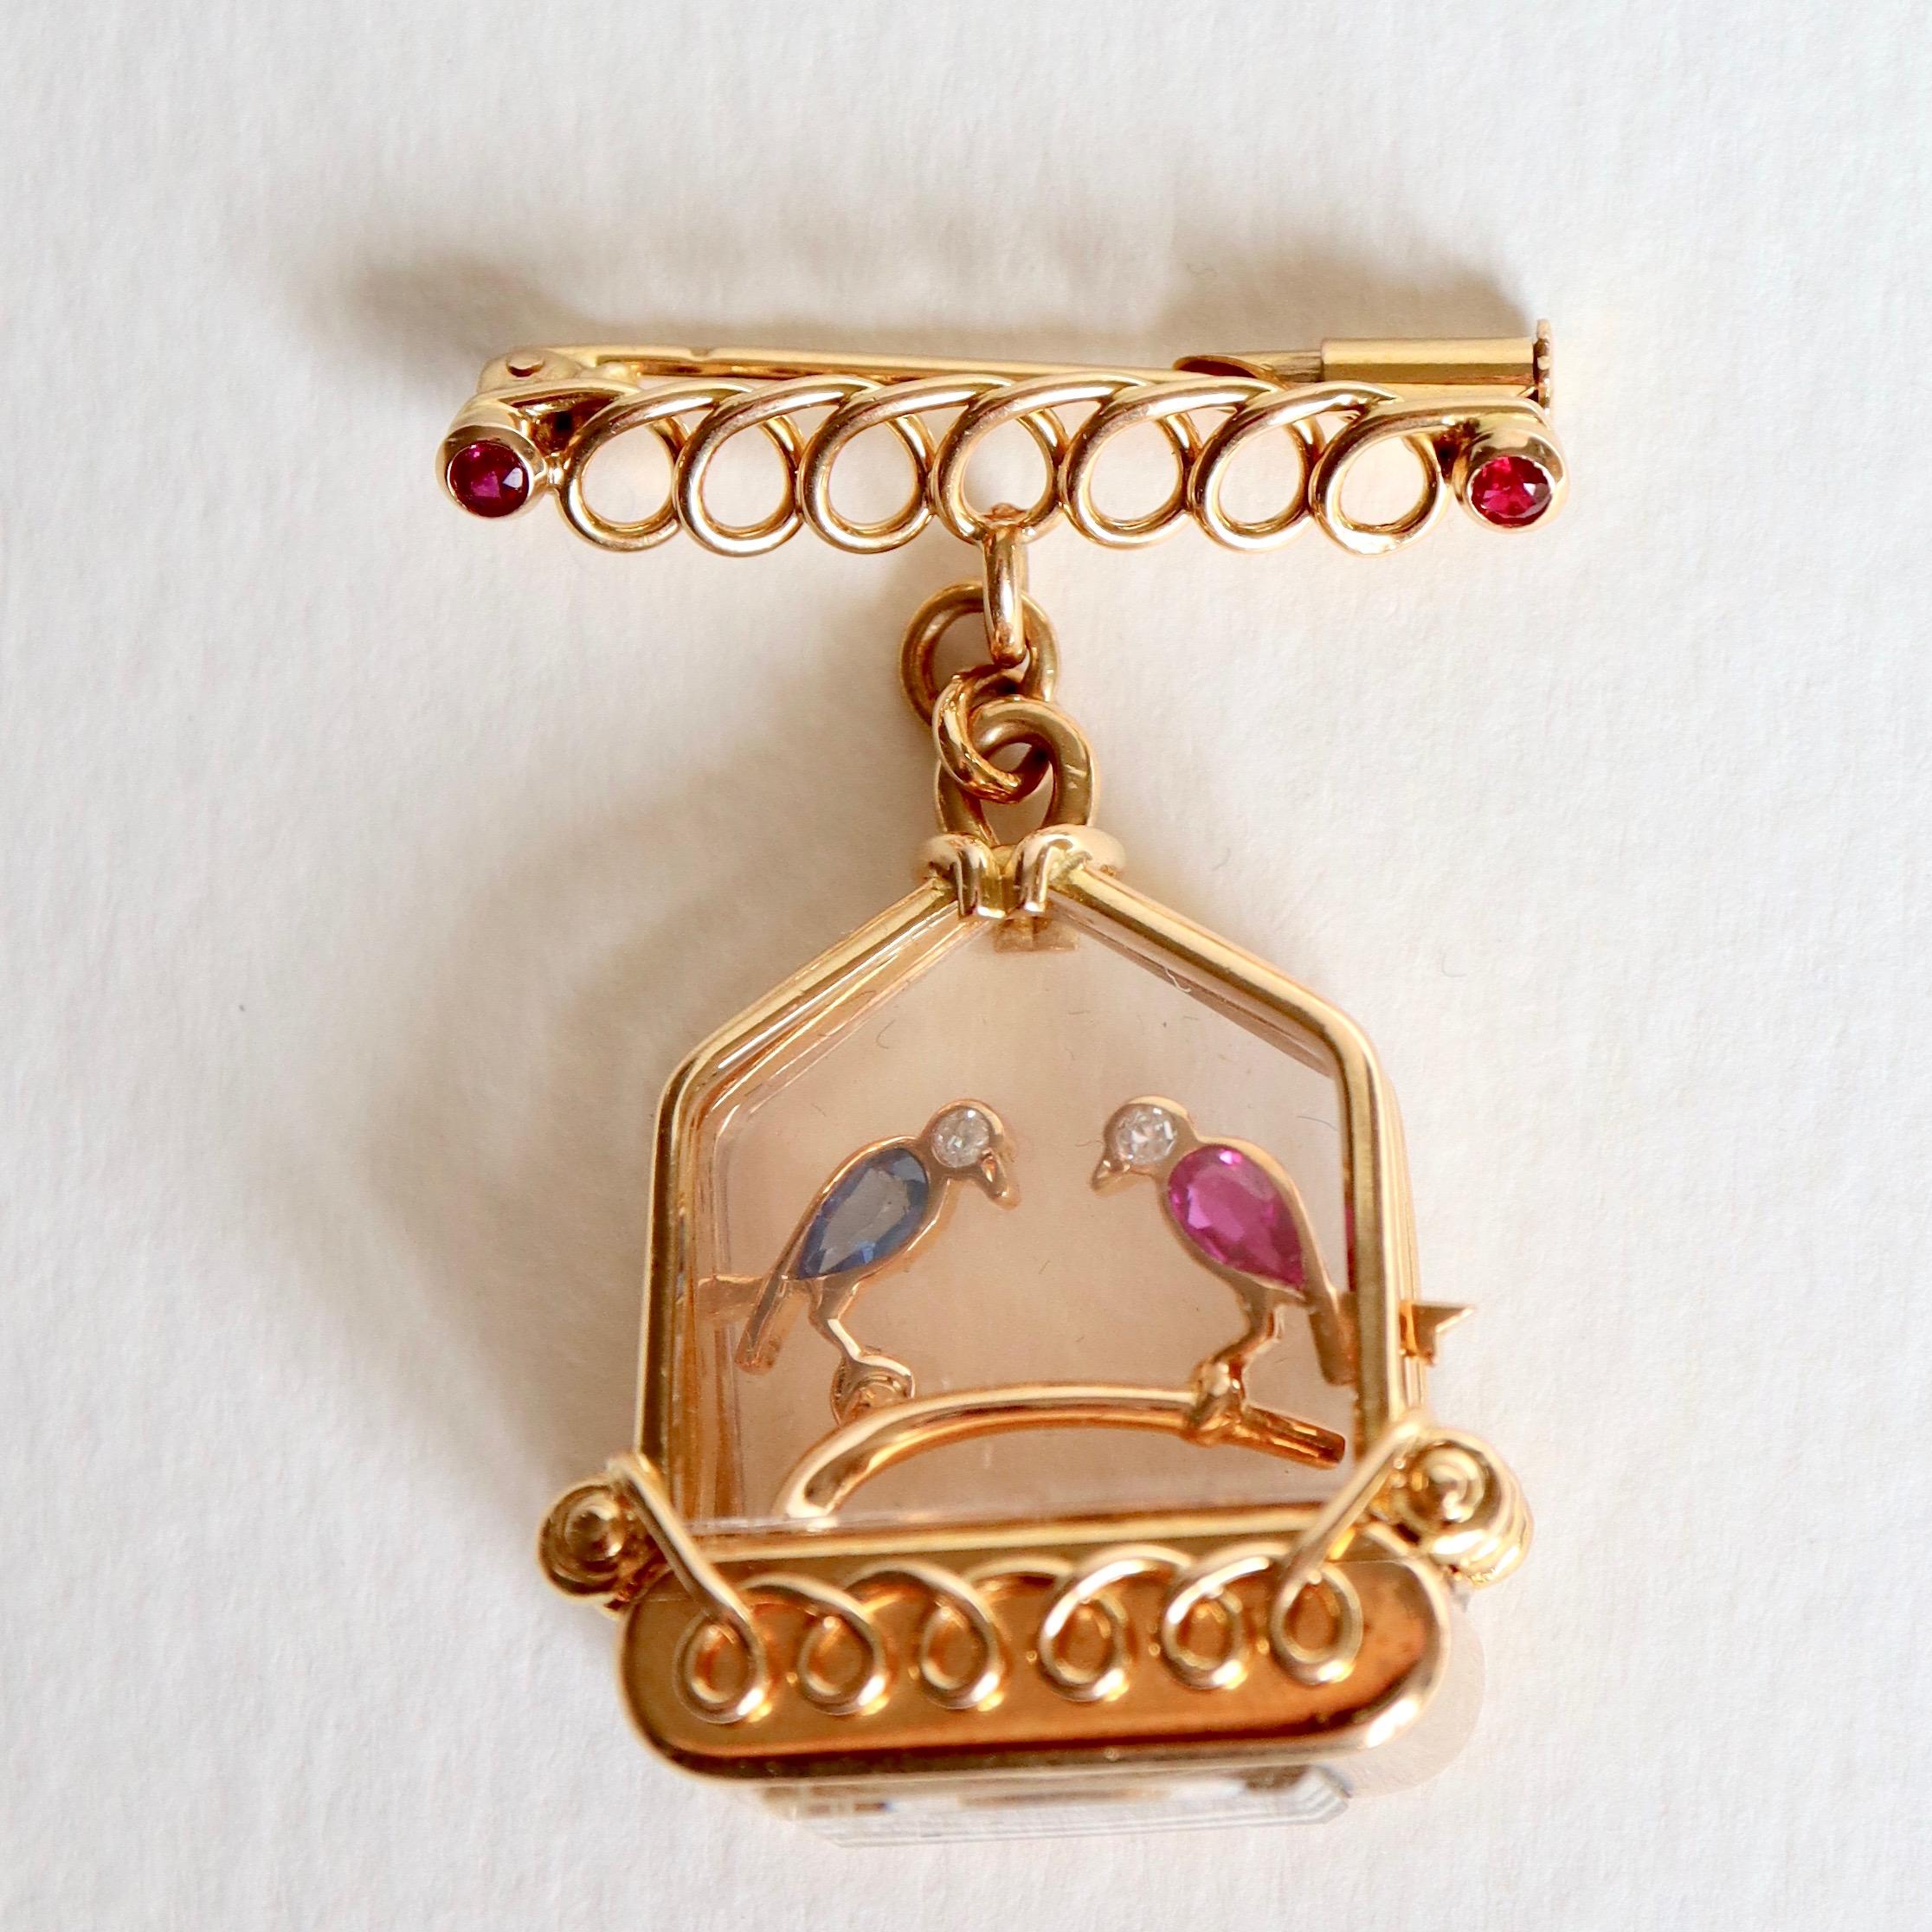 UTI Watch Caged Birds Brooch in 18 Carat Gold circa 1950 Ruby Sapphire Diamonds For Sale 3